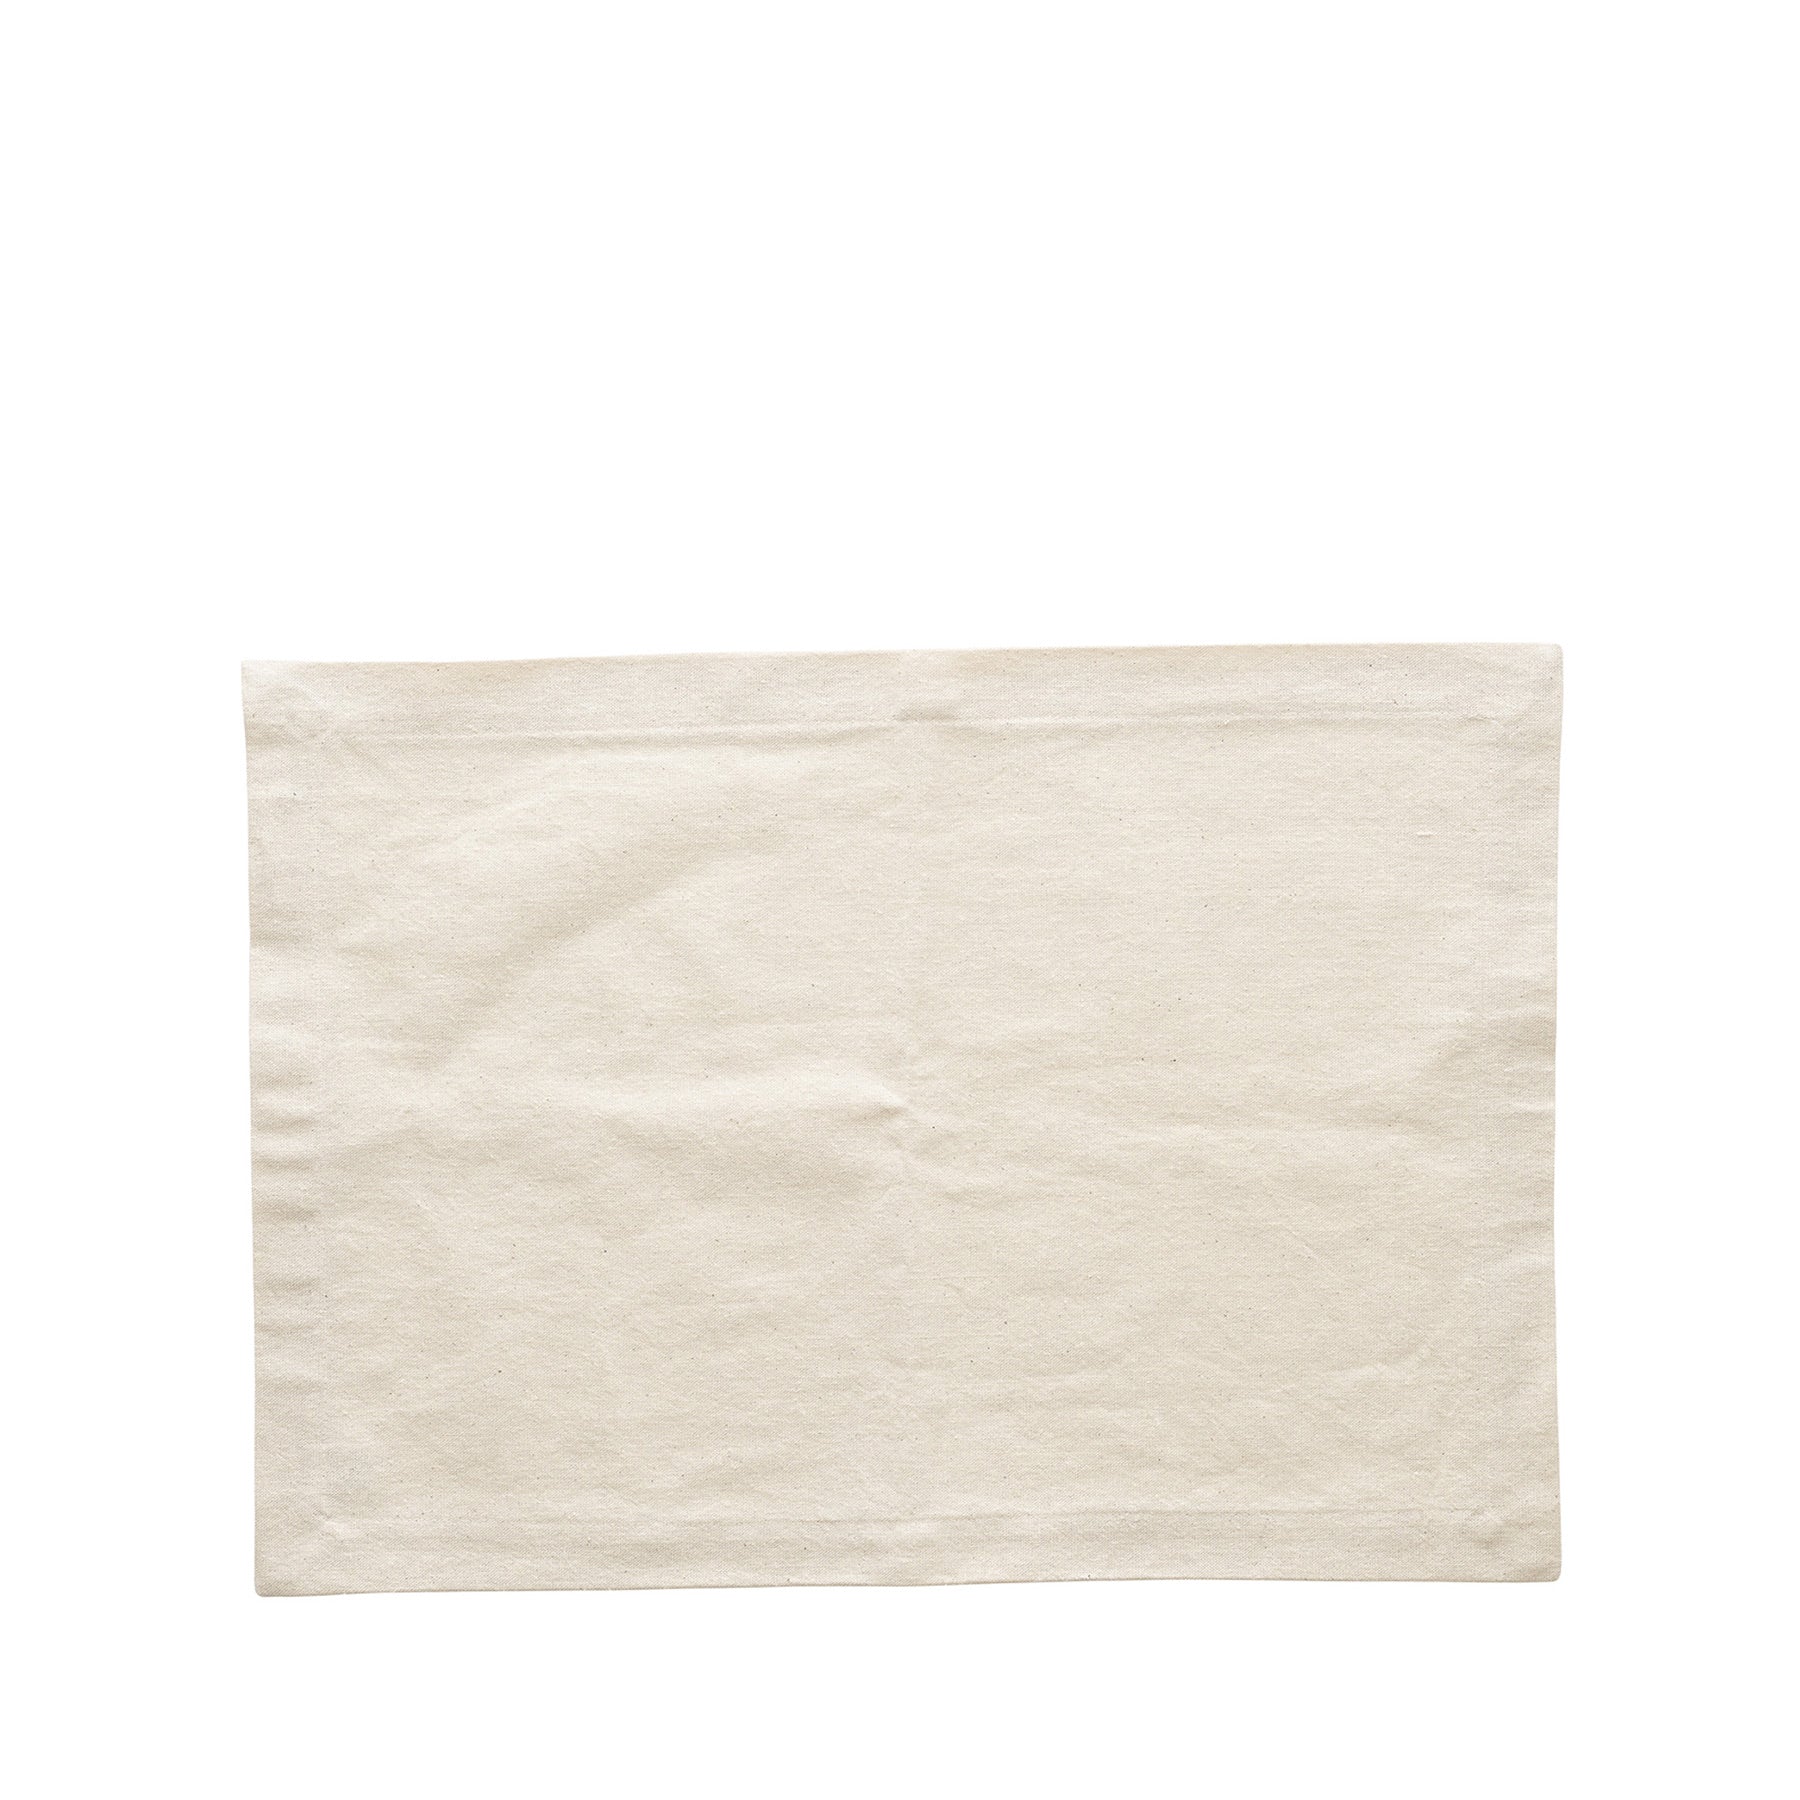 Organic Cotton Placemat in Cream Zoom Image 1